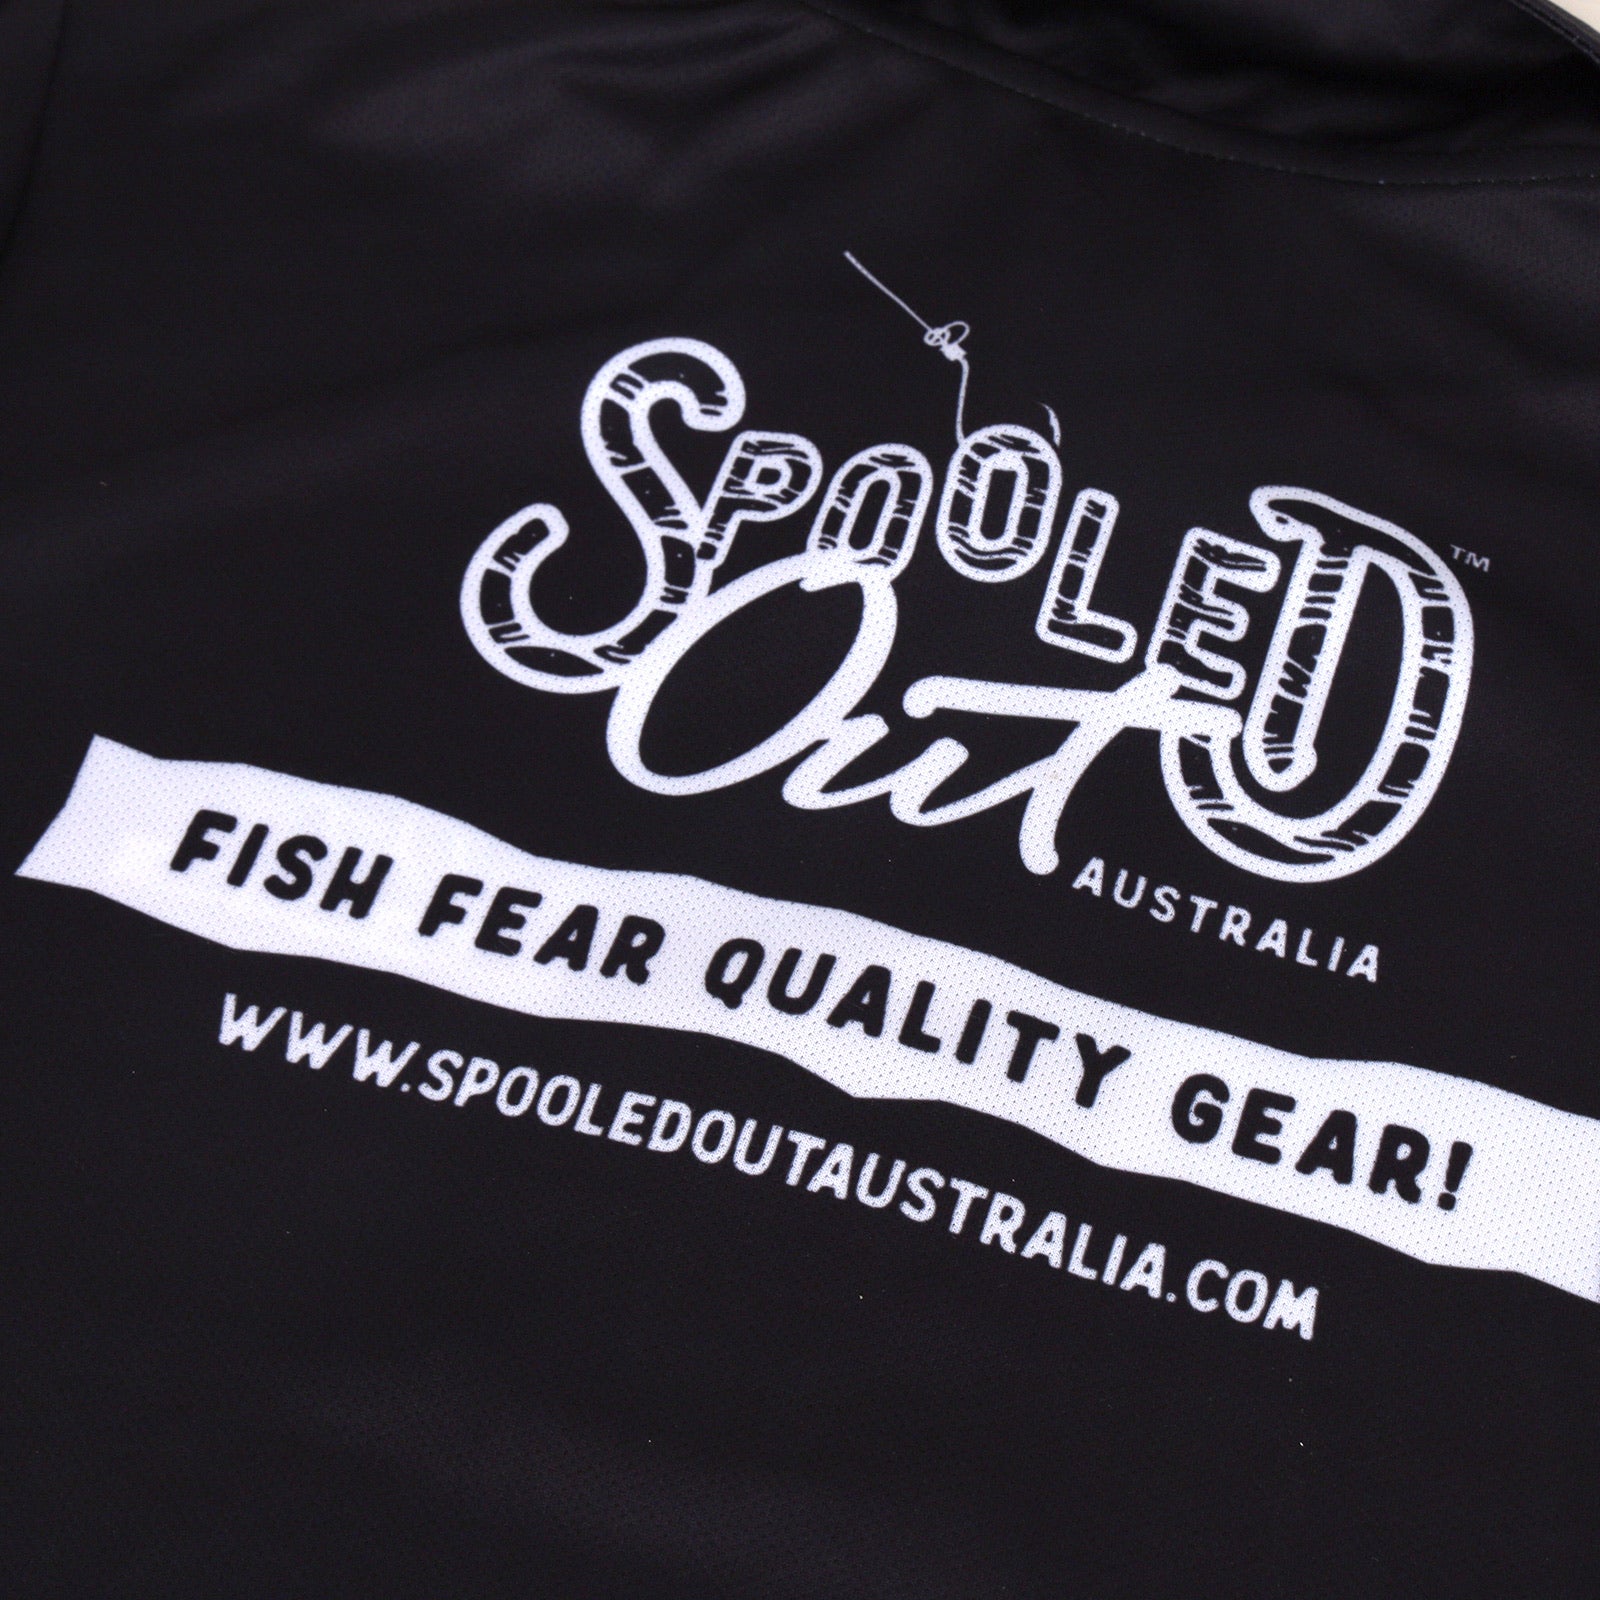 Spooled Out Australia logo close up with "Fish fear quality gear" slogan